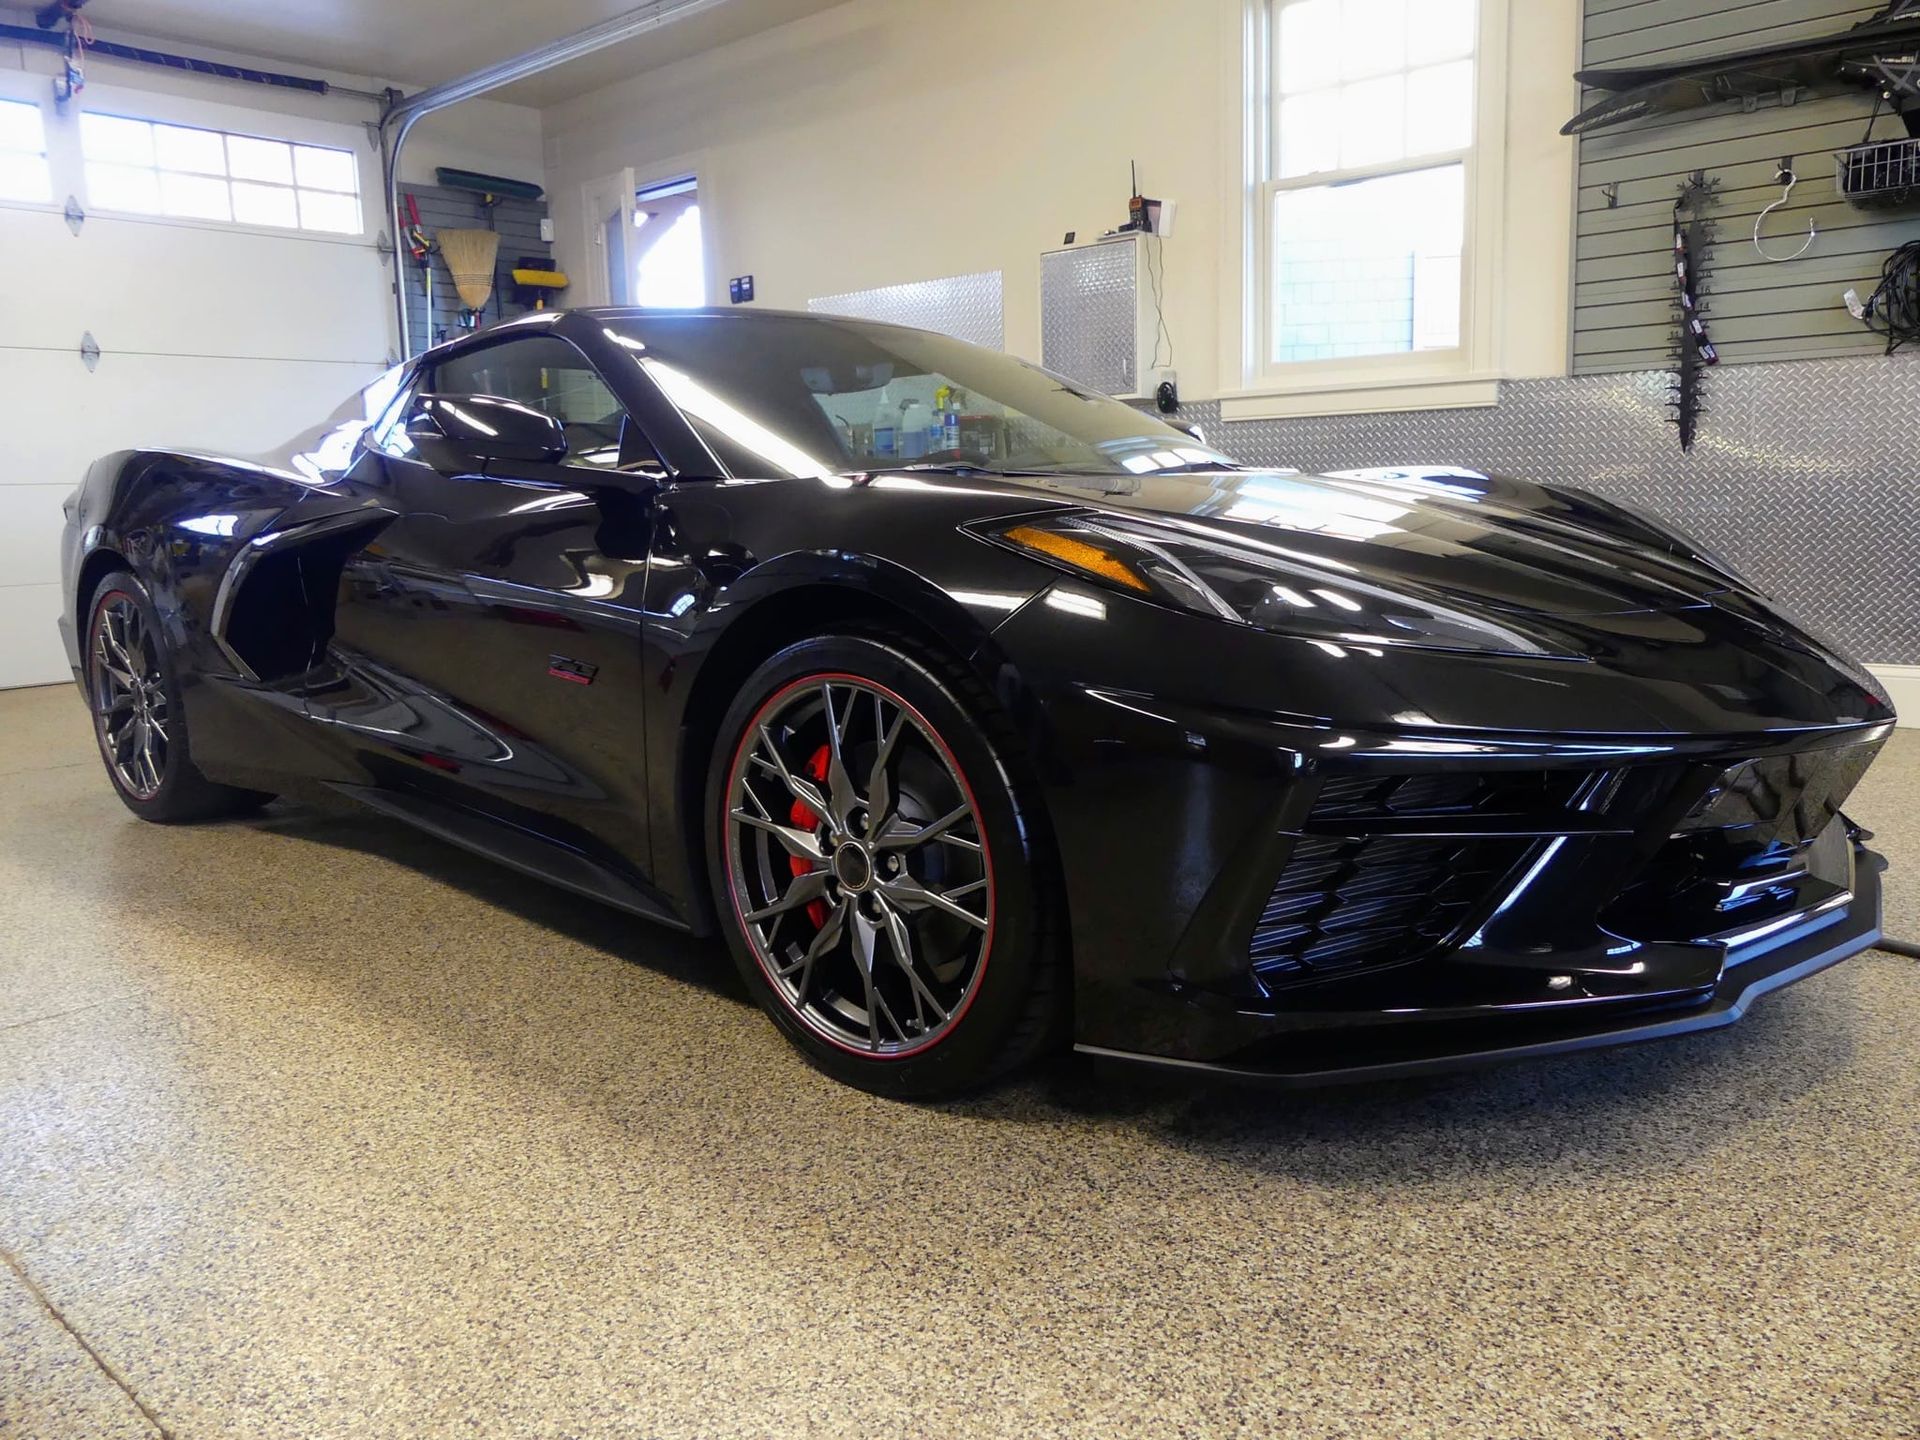 A black sports car is parked in a garage.